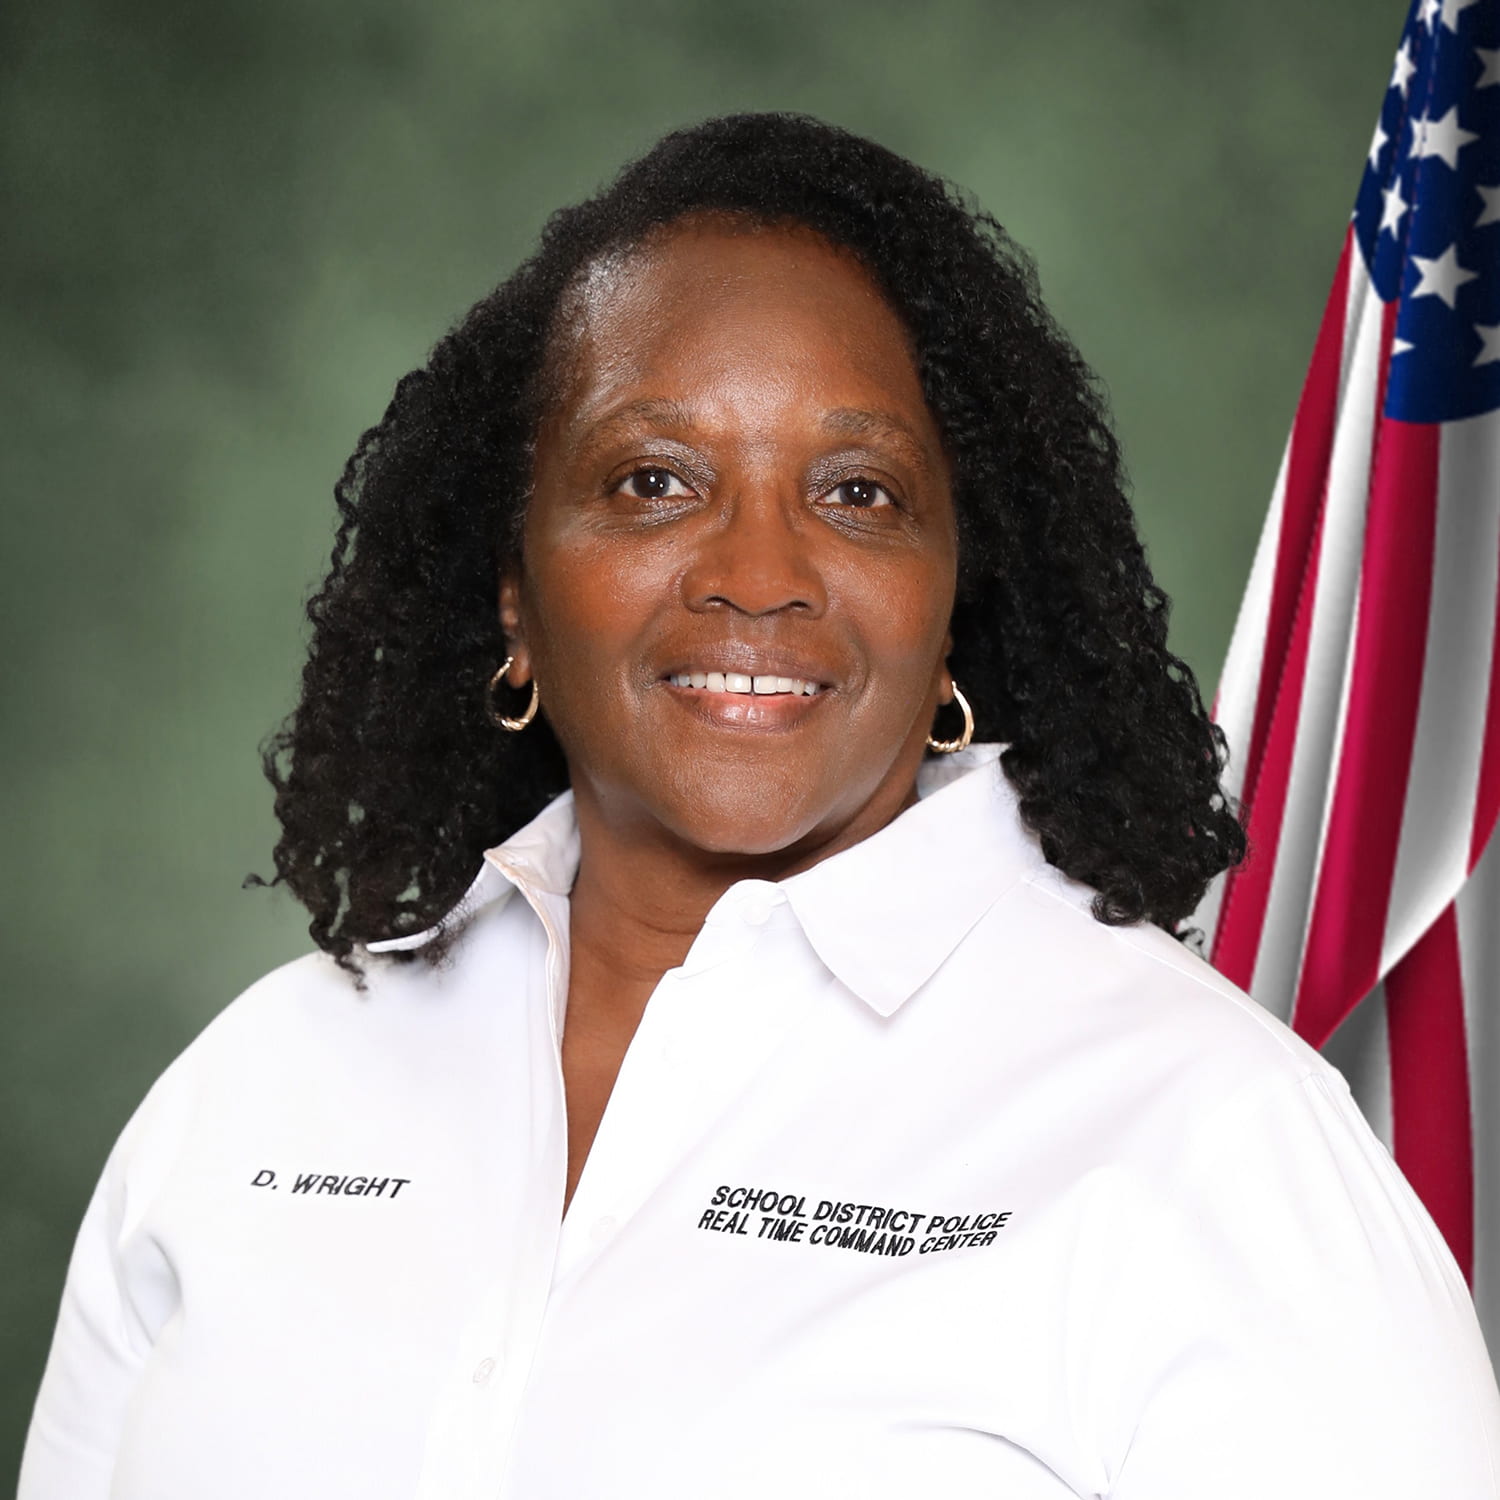 Dee Wright - Real Time Command Center